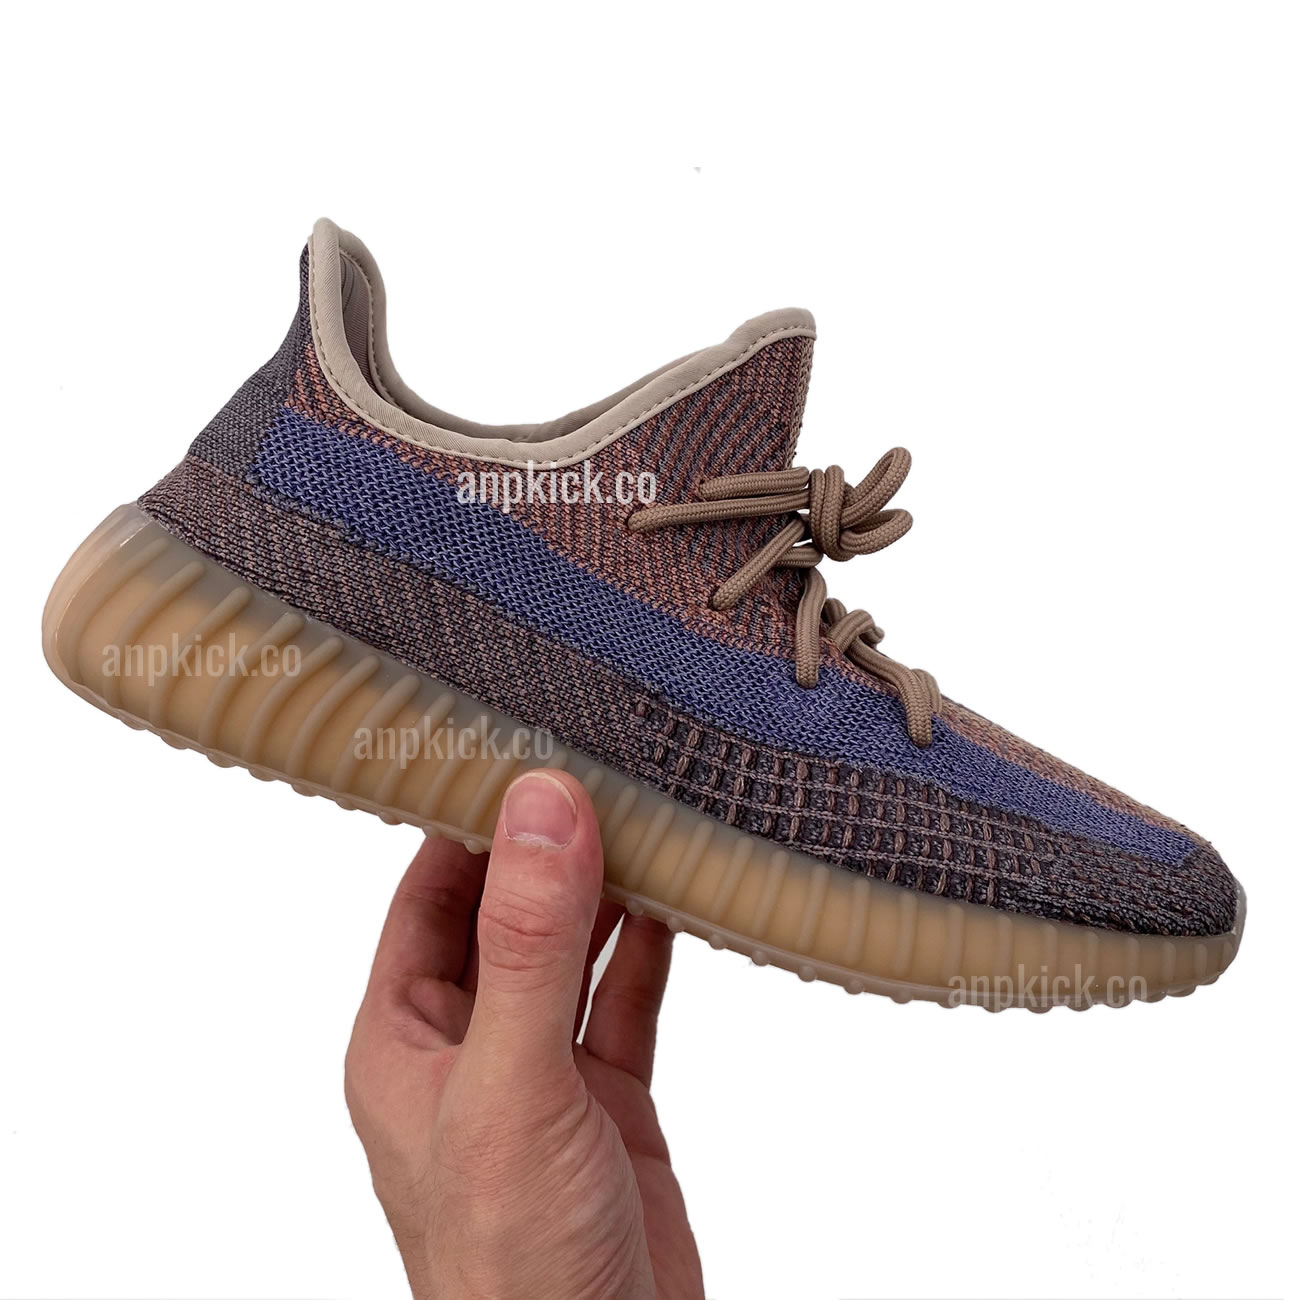 Adidas Yeezy Boost 350 V2 Yecher Ho2795 New Release Date First Look (11) - newkick.org